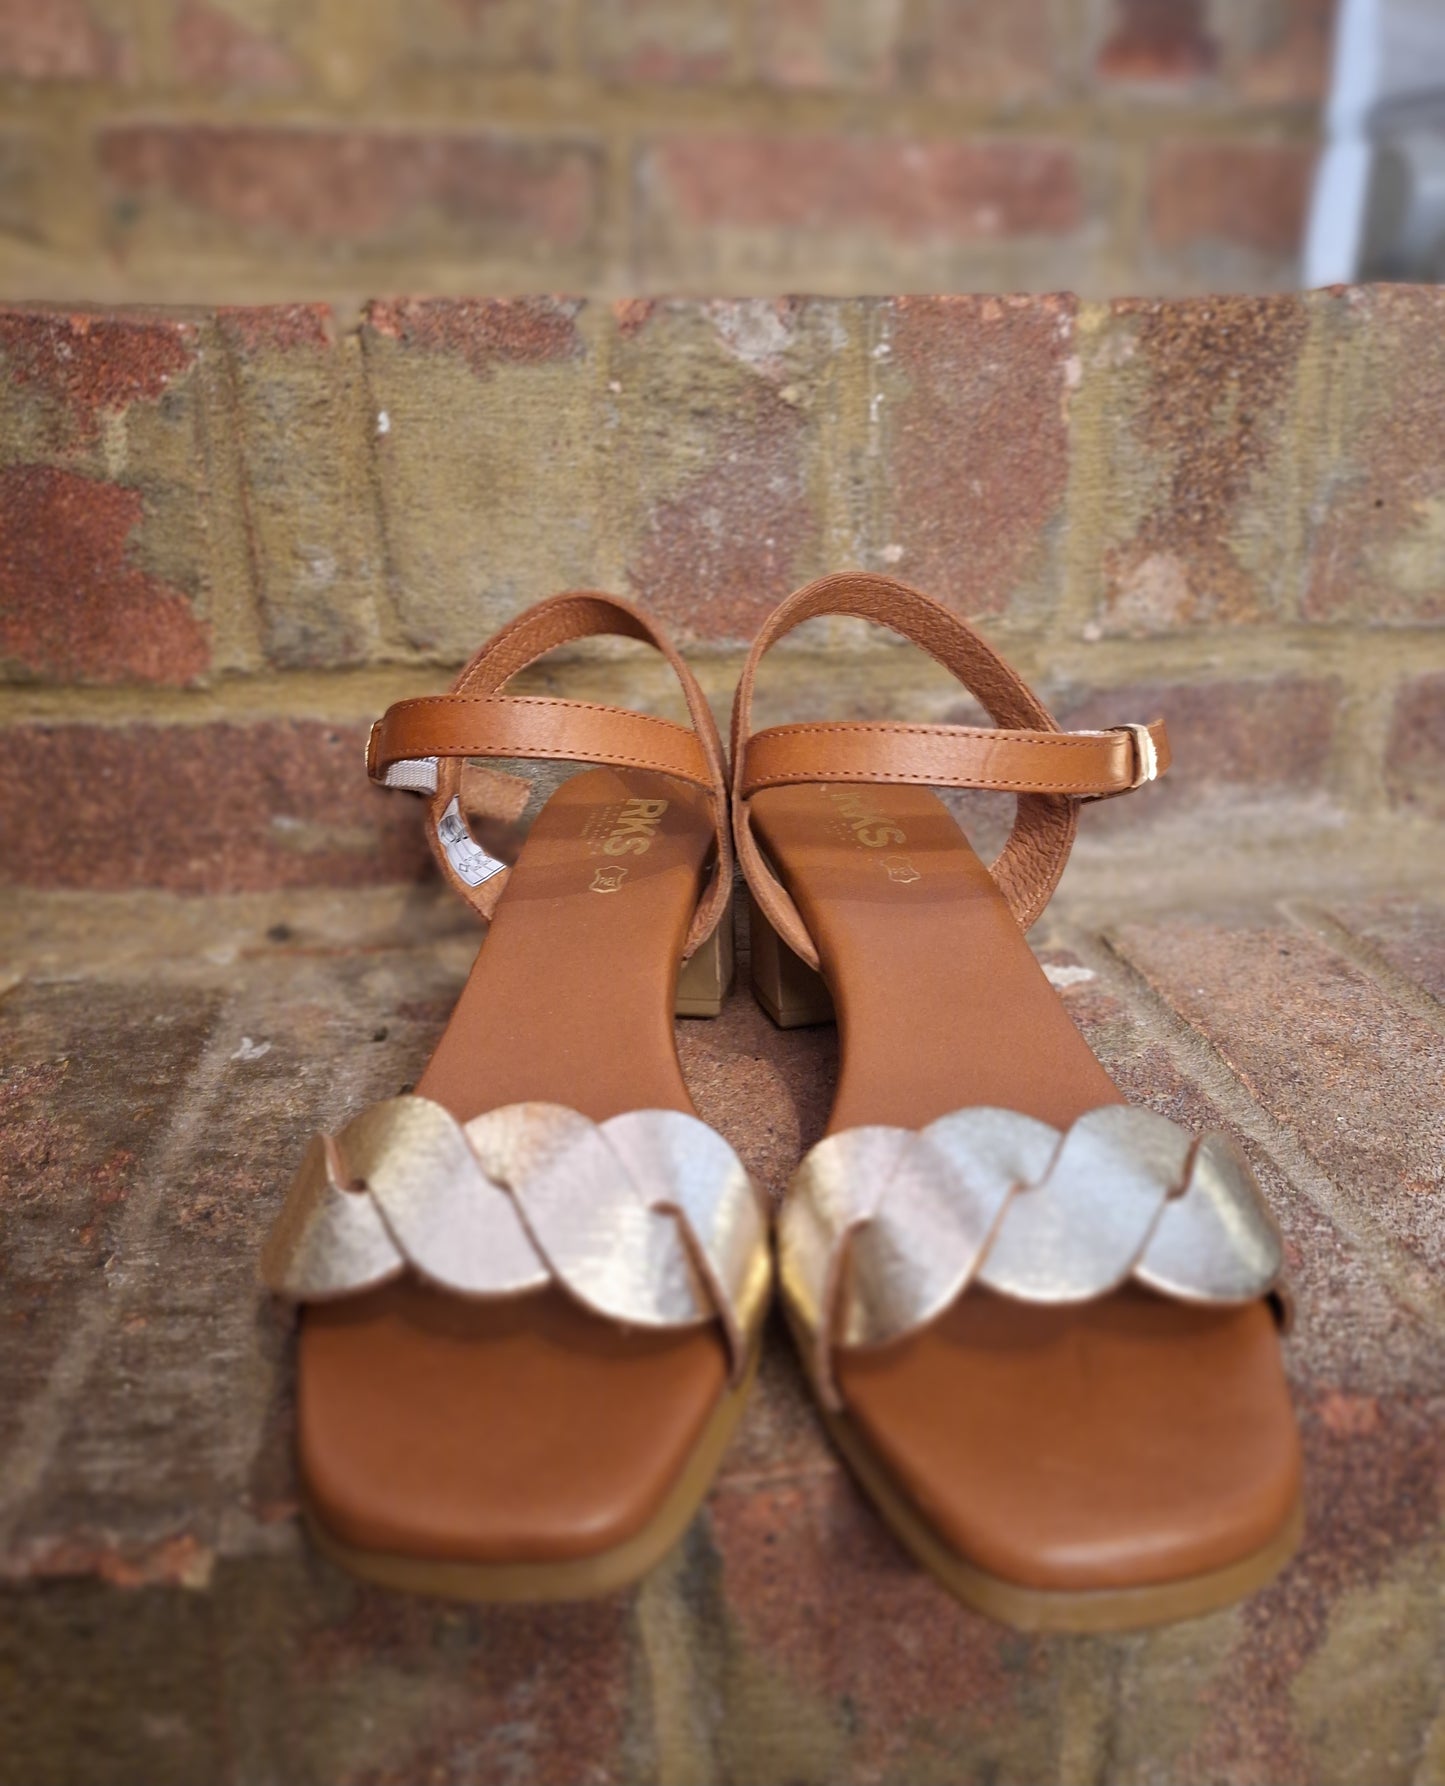 RKS tan and gold sandals 6